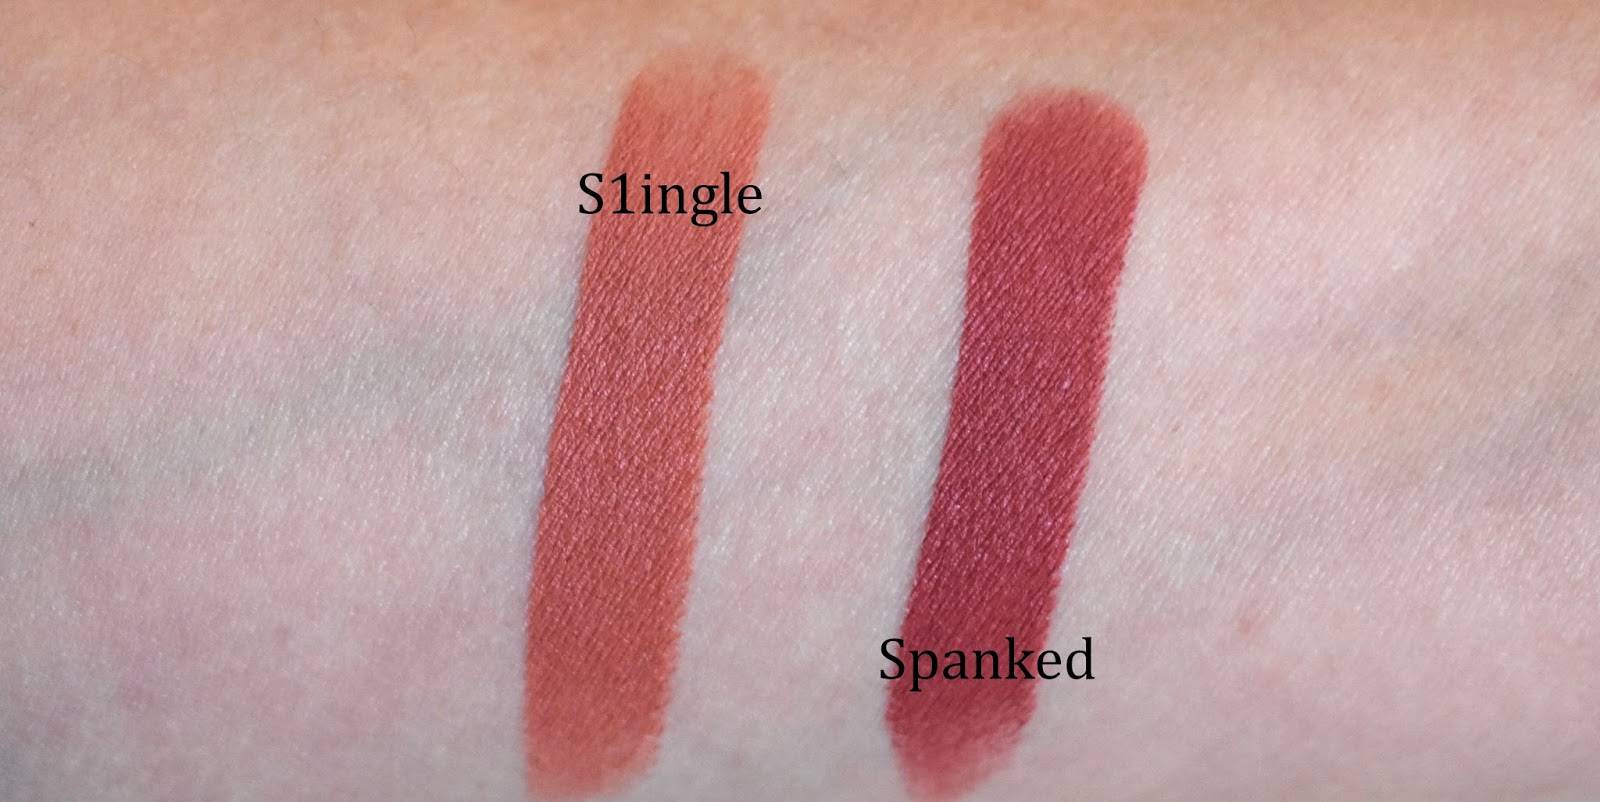 Fenty Beauty Mattemoiselle Plush Matte Lipsticks 2 Shades Swatches And Review Aquaheart